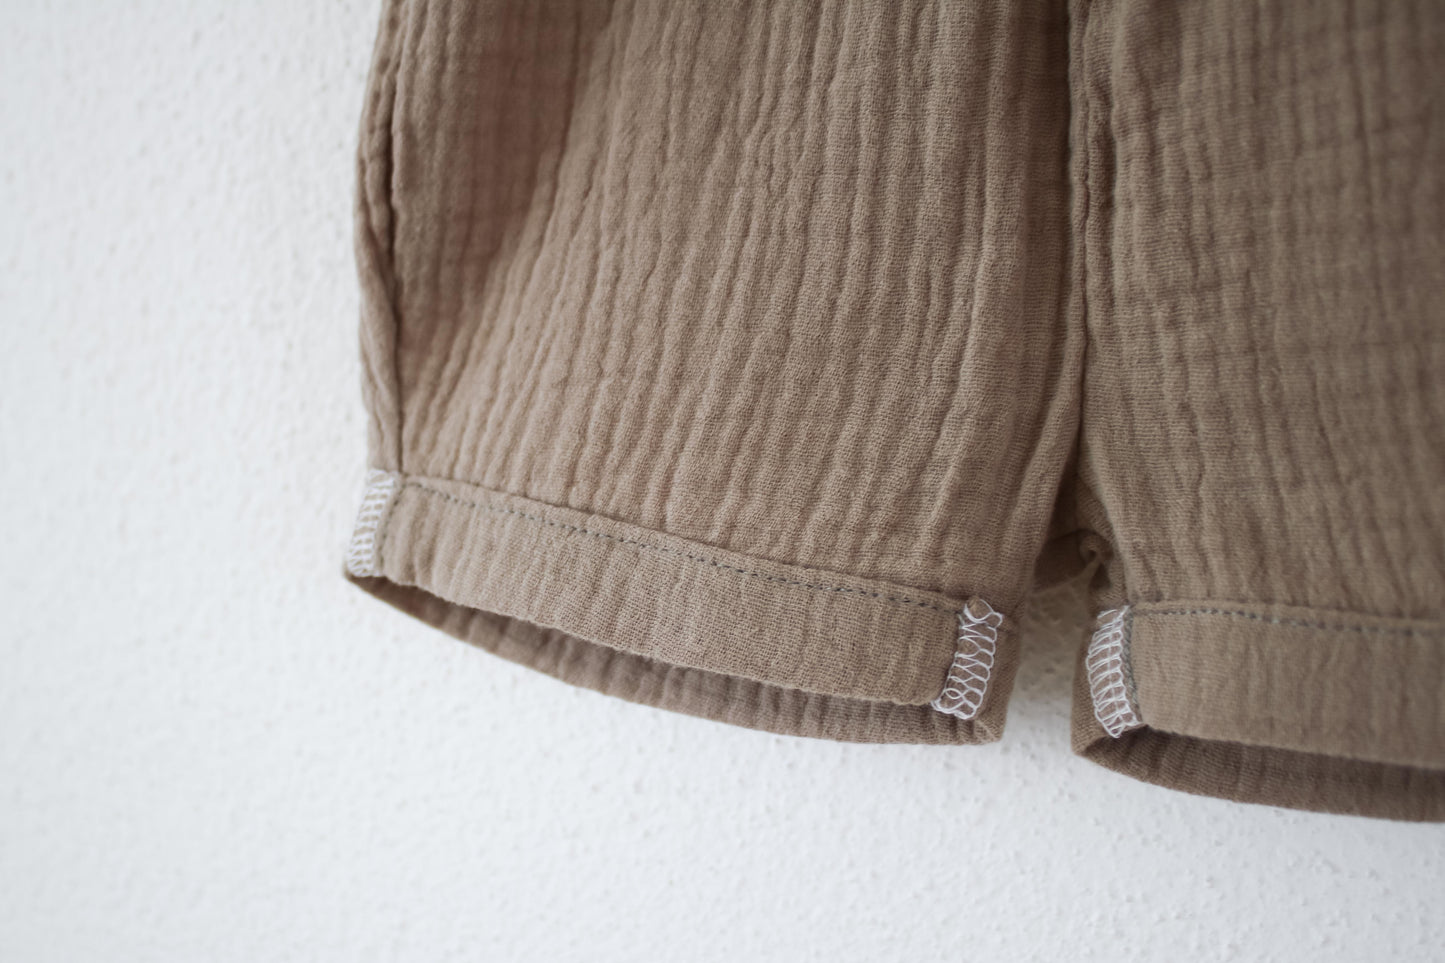 Shorts "Musselin" (Taupe)